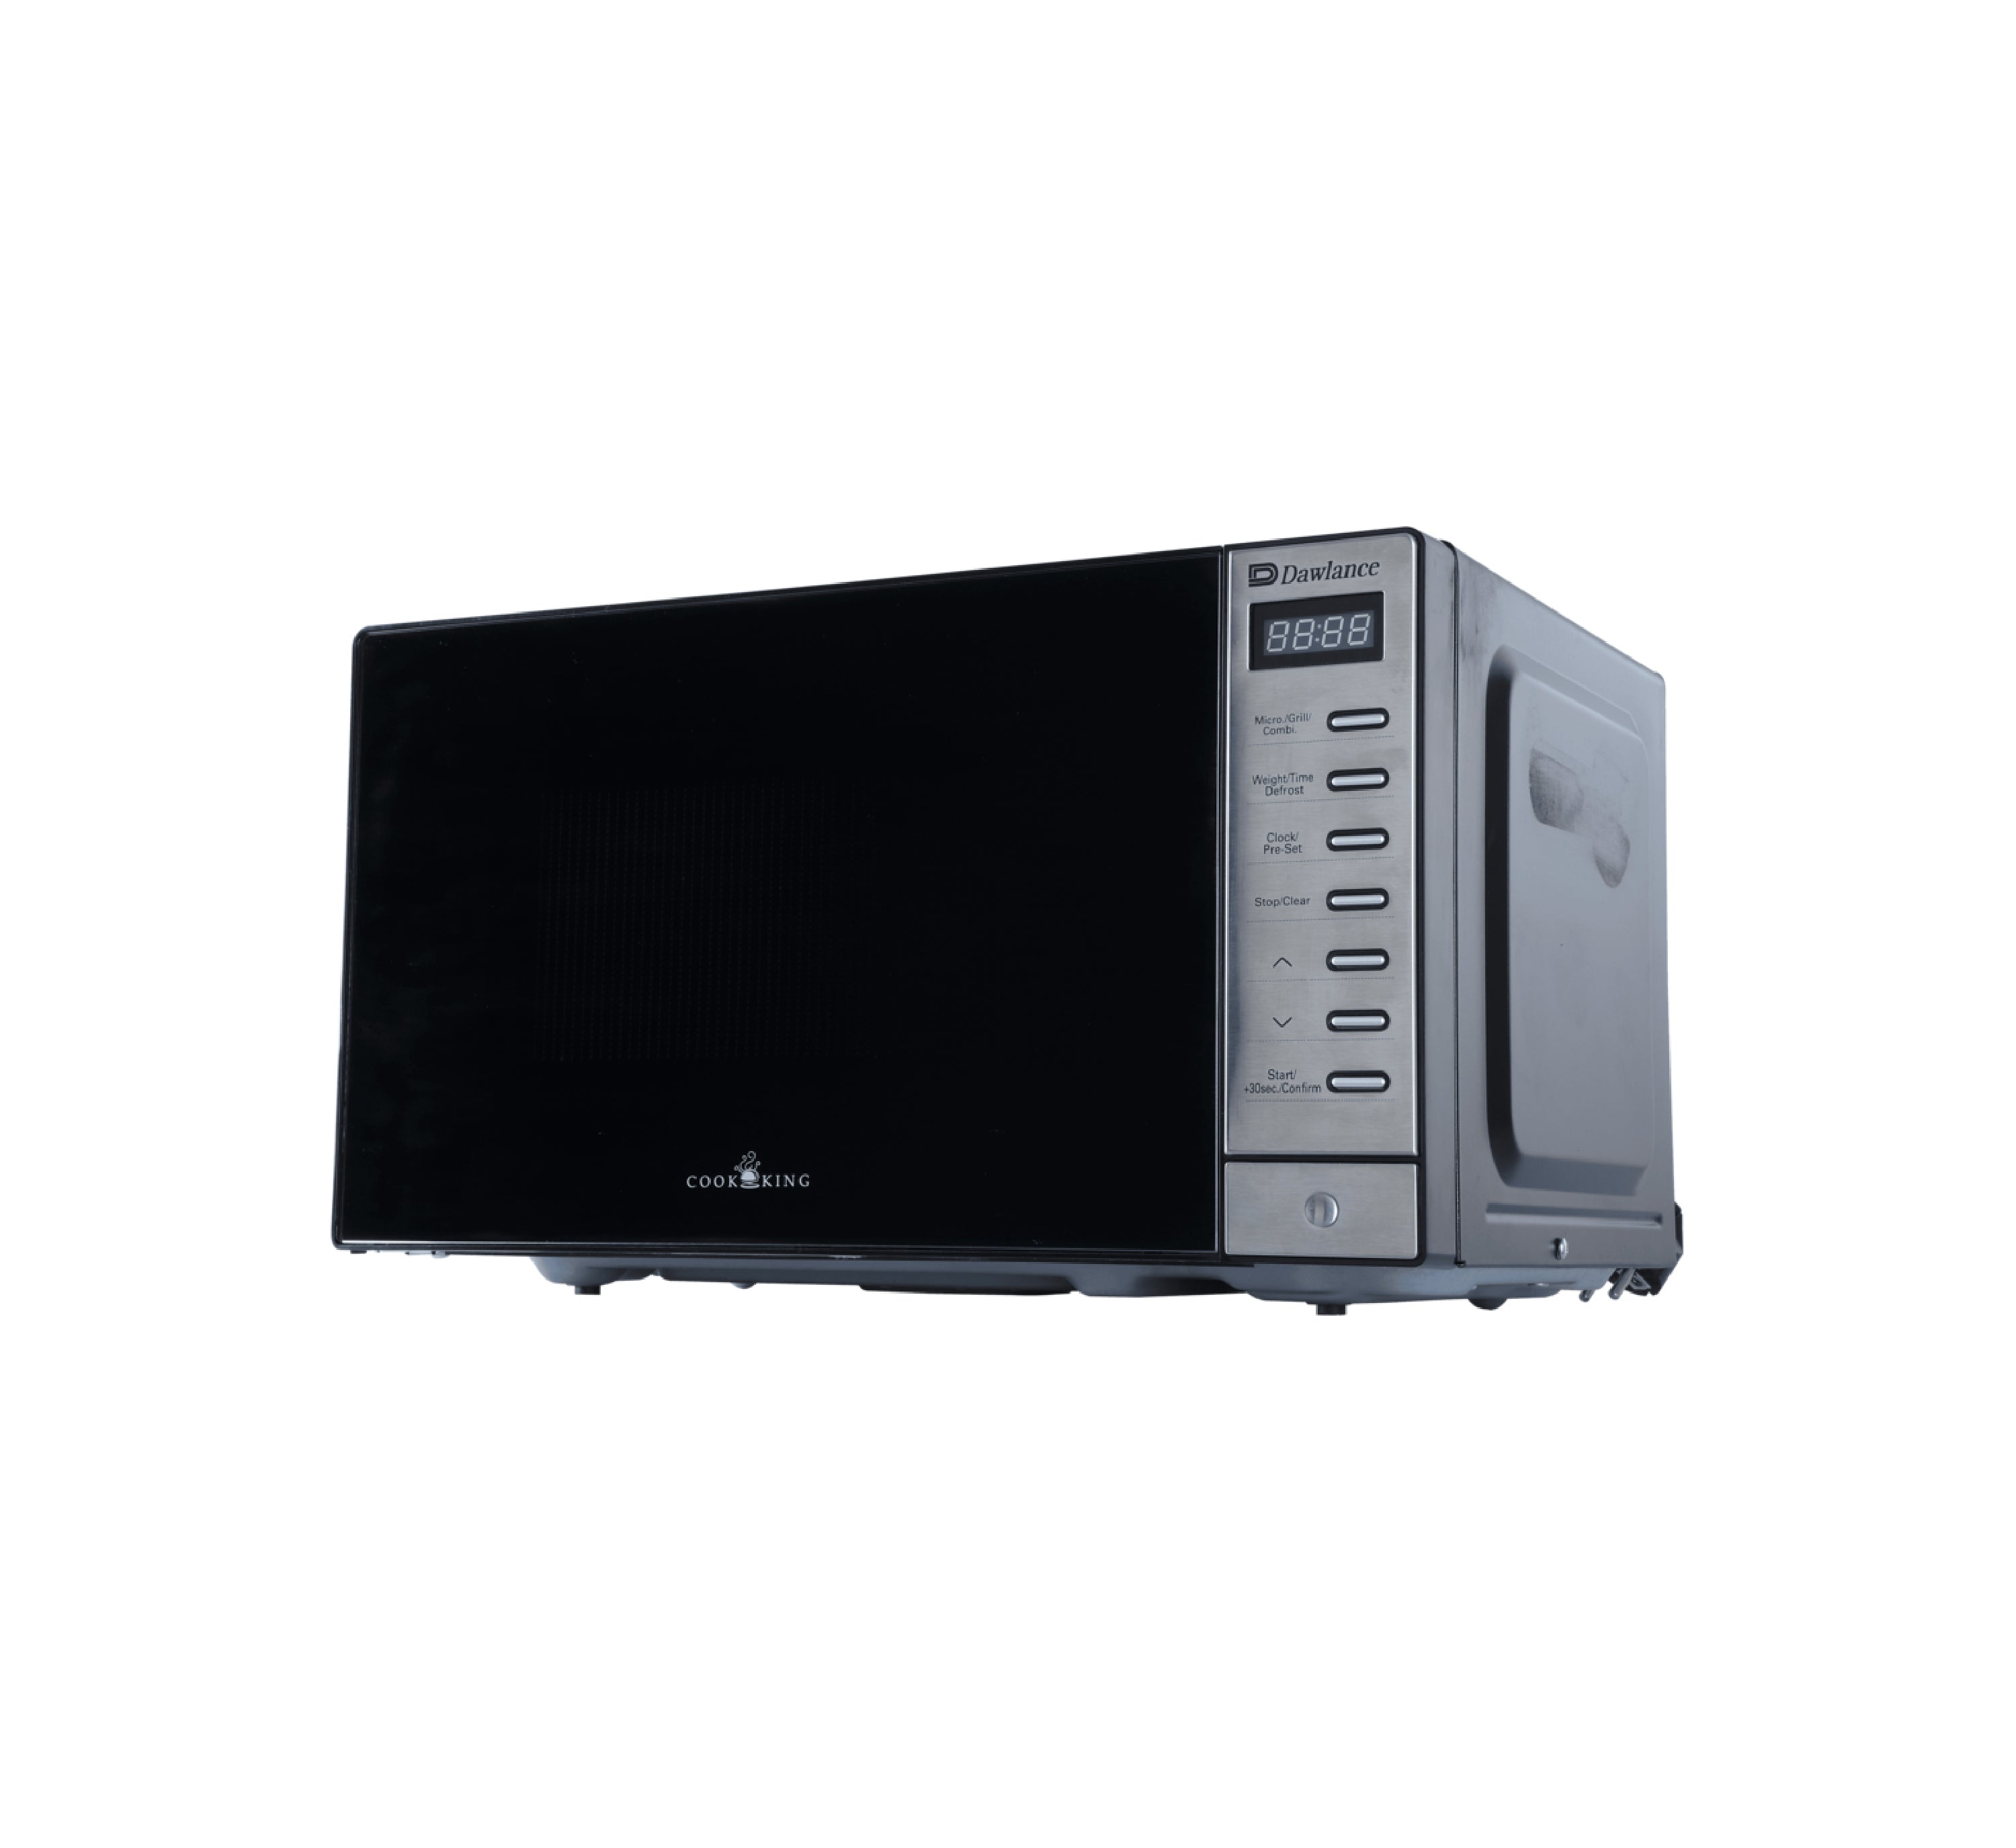 DAWLANCE DW-297 GSS -Grilling Microwave Oven